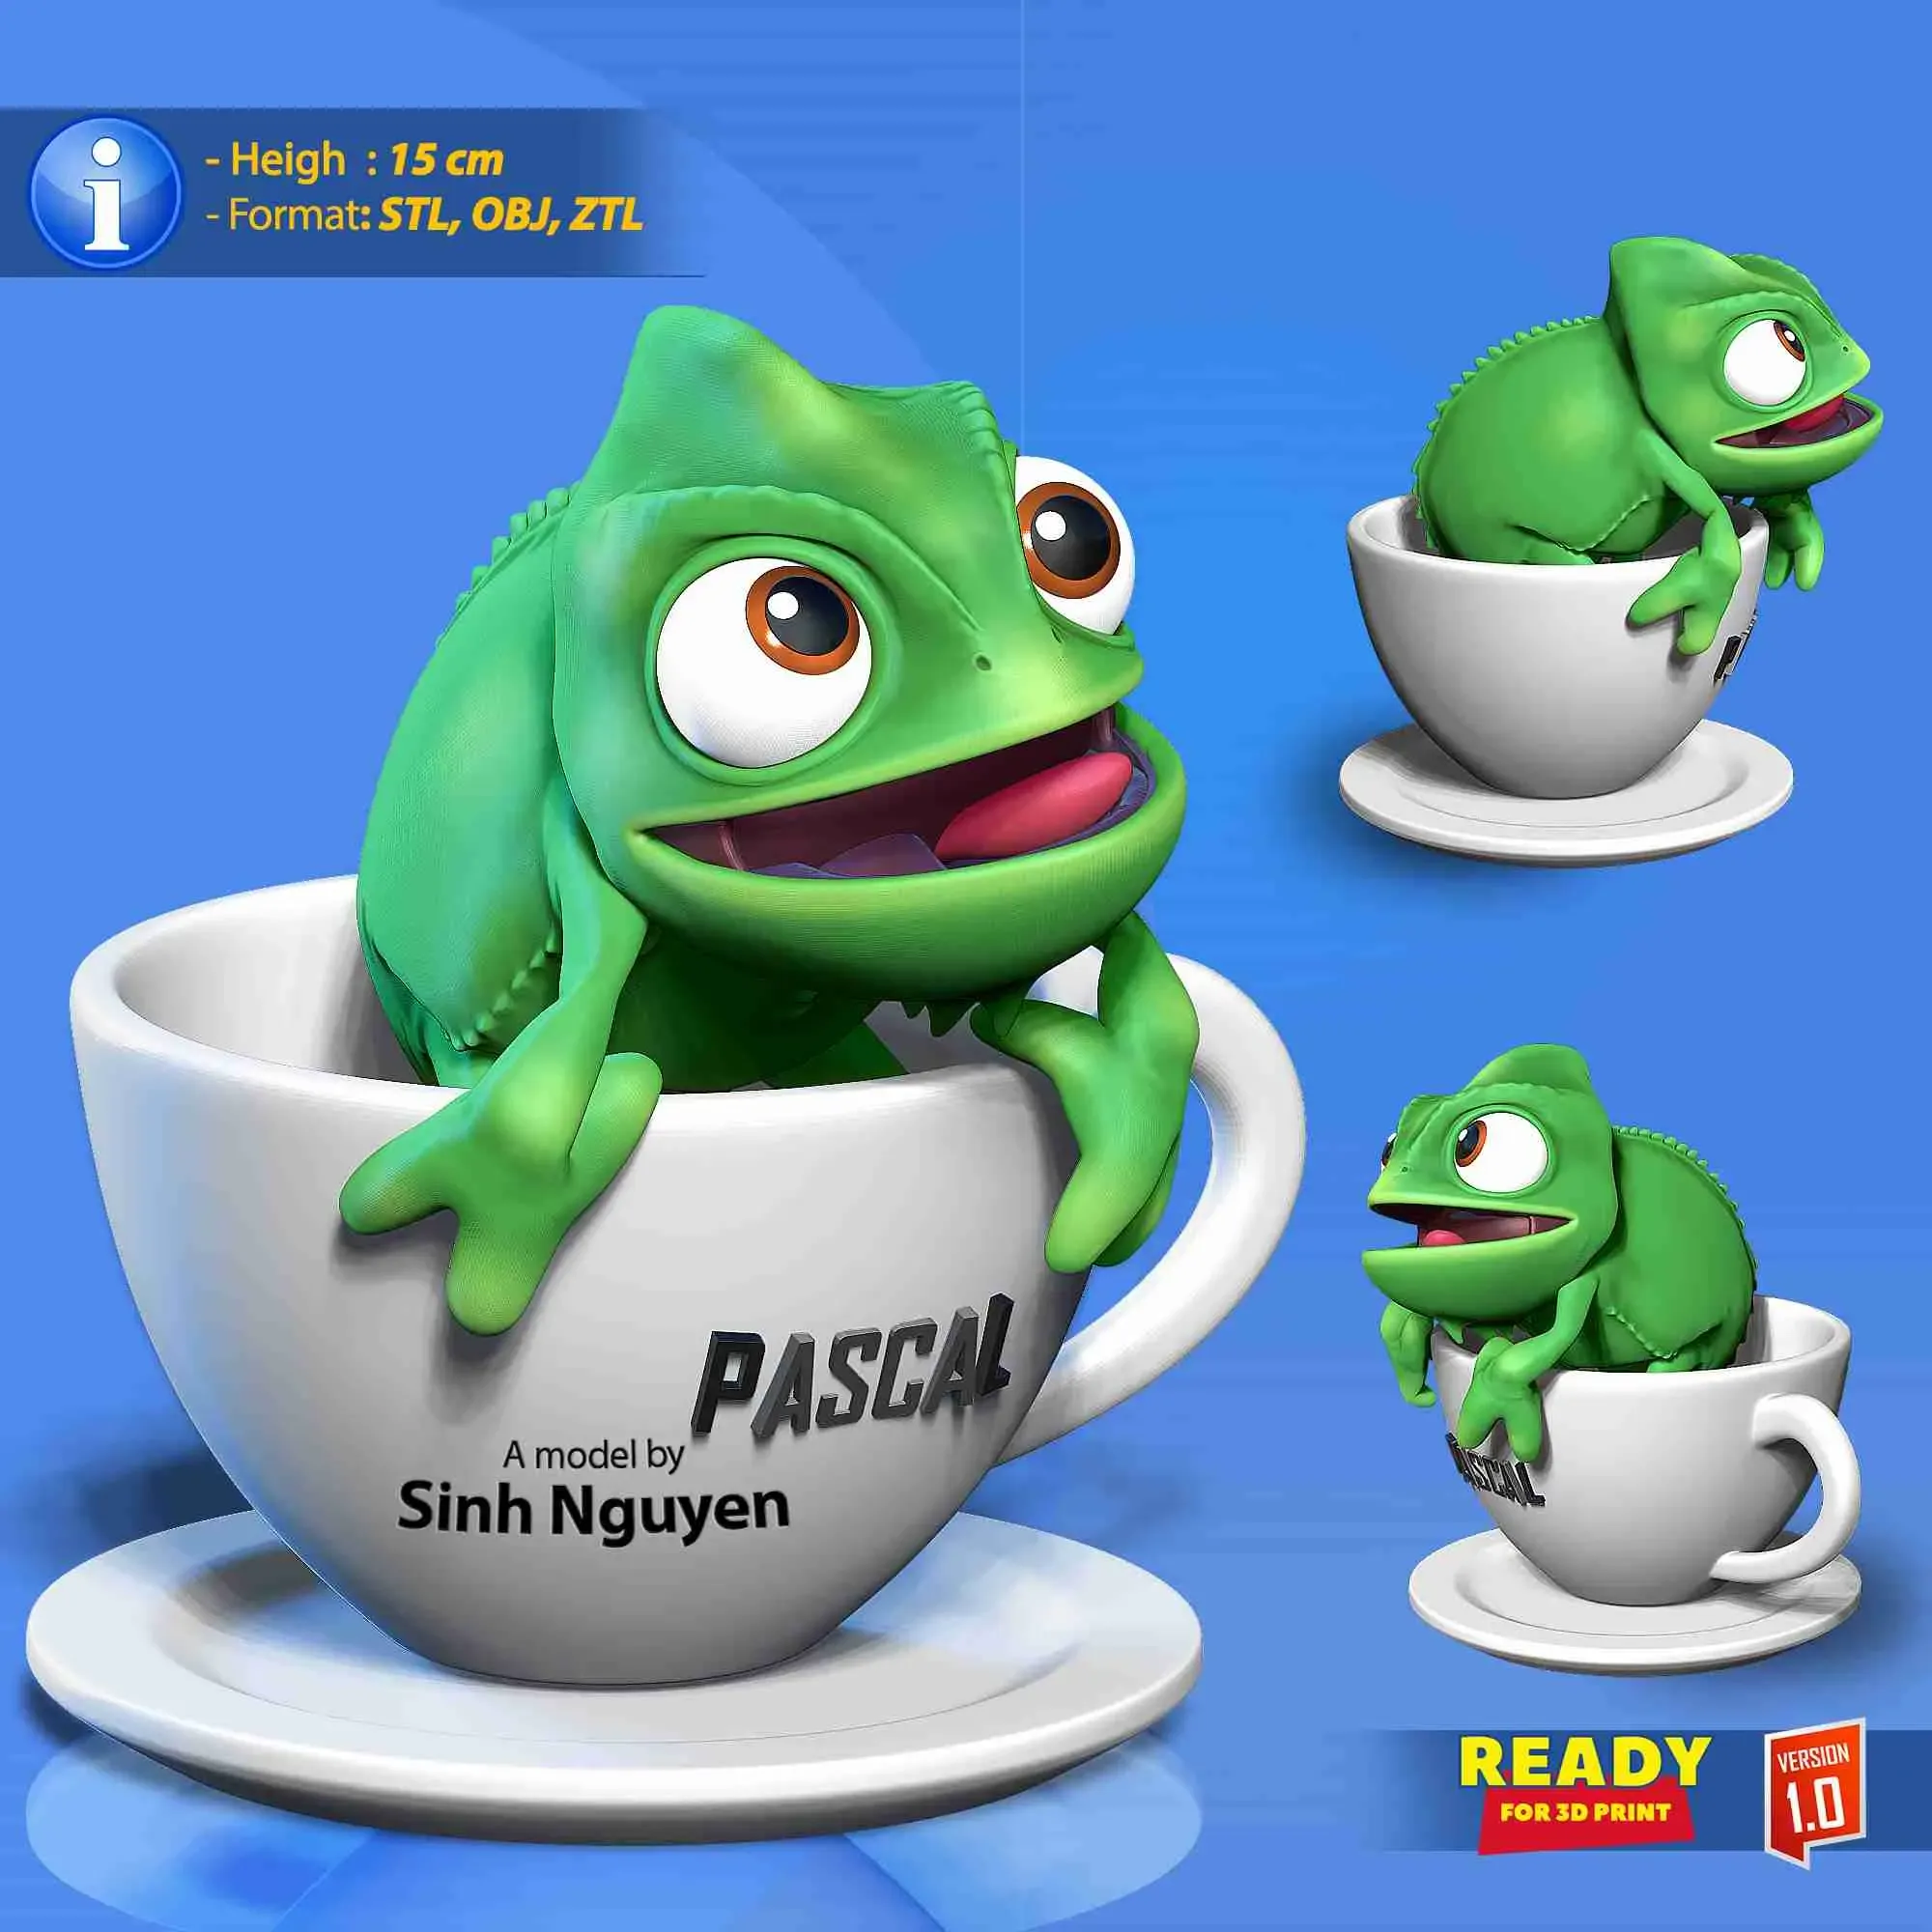 Pascal in cup